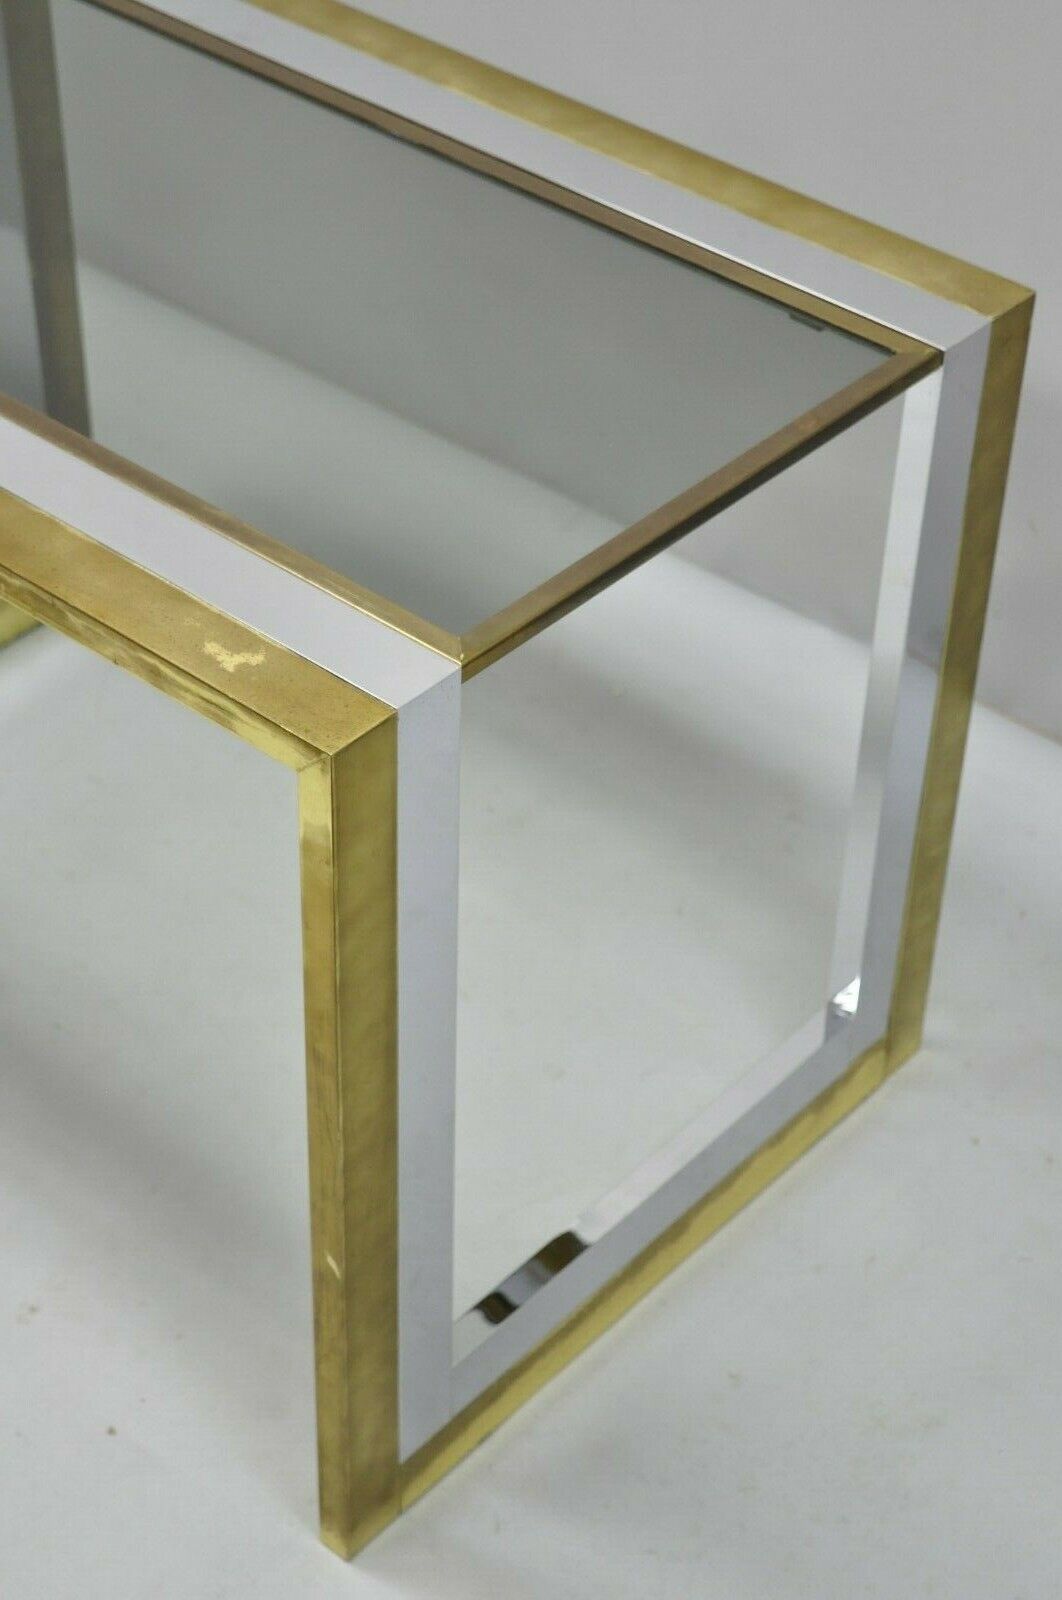 Vtg Mid Century Modern Chrome Brass Glass Waterfall Side Table by Messin Finland